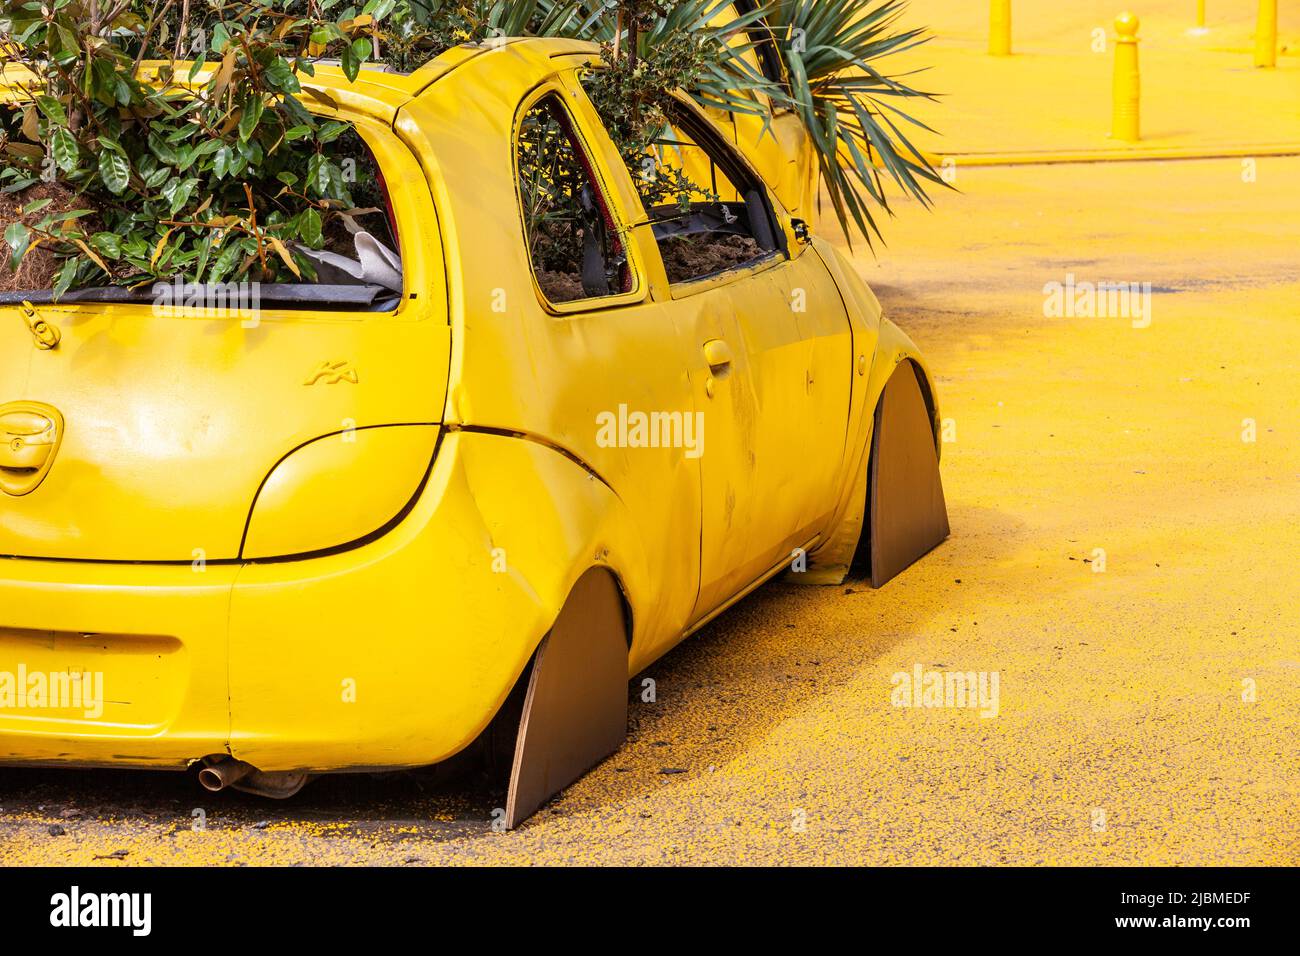 Yellow car, overgrown with plants, in a yellow environment. Brussels. Stock Photo